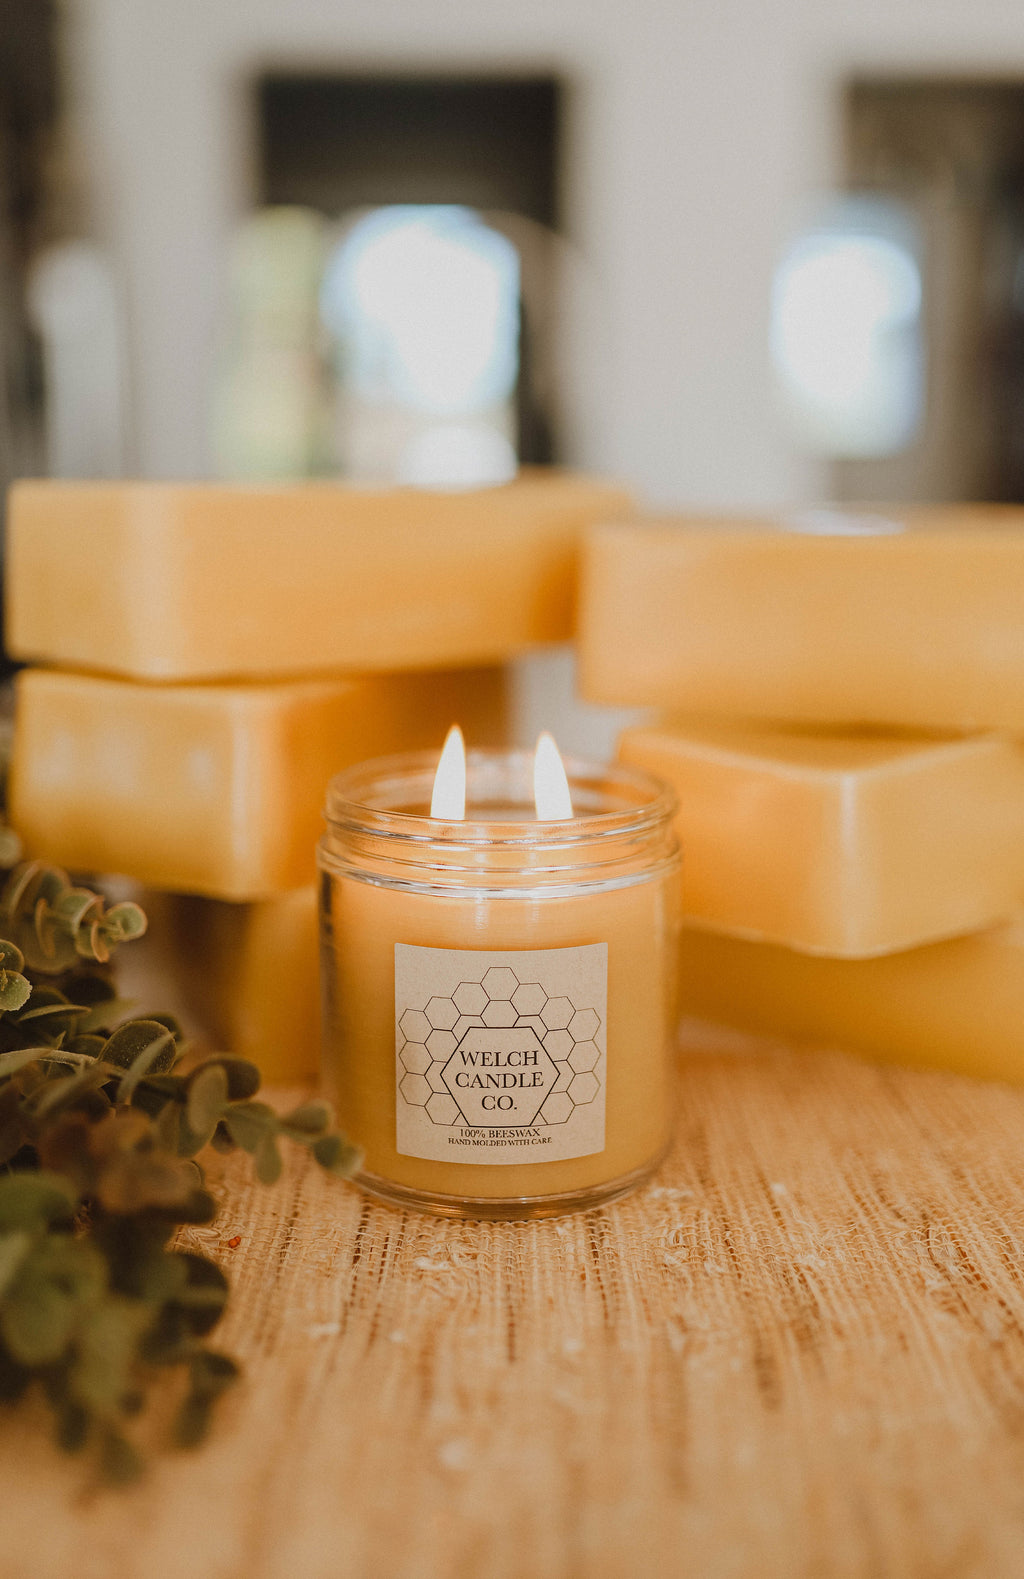 General Wax & Candle  9 main benefits of beeswax candles